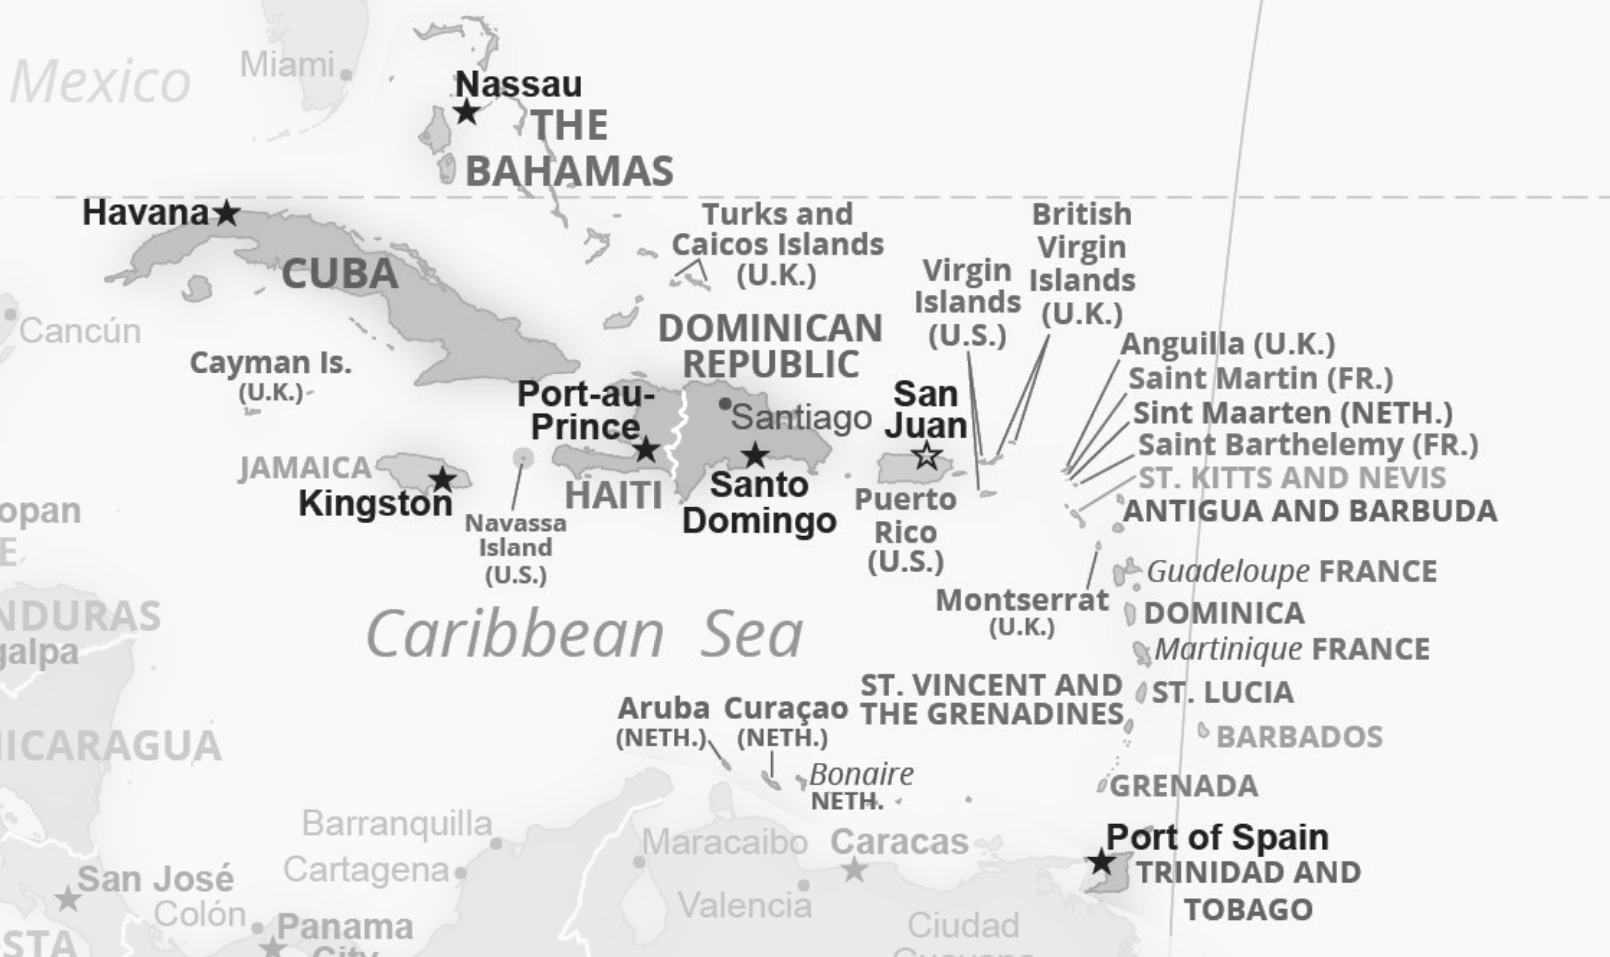 A black-and-white map of the Caribbean islands, including Cuba, Jamaica, Haiti, the Dominican Republic, Puerto Rico, and the Bahamas.